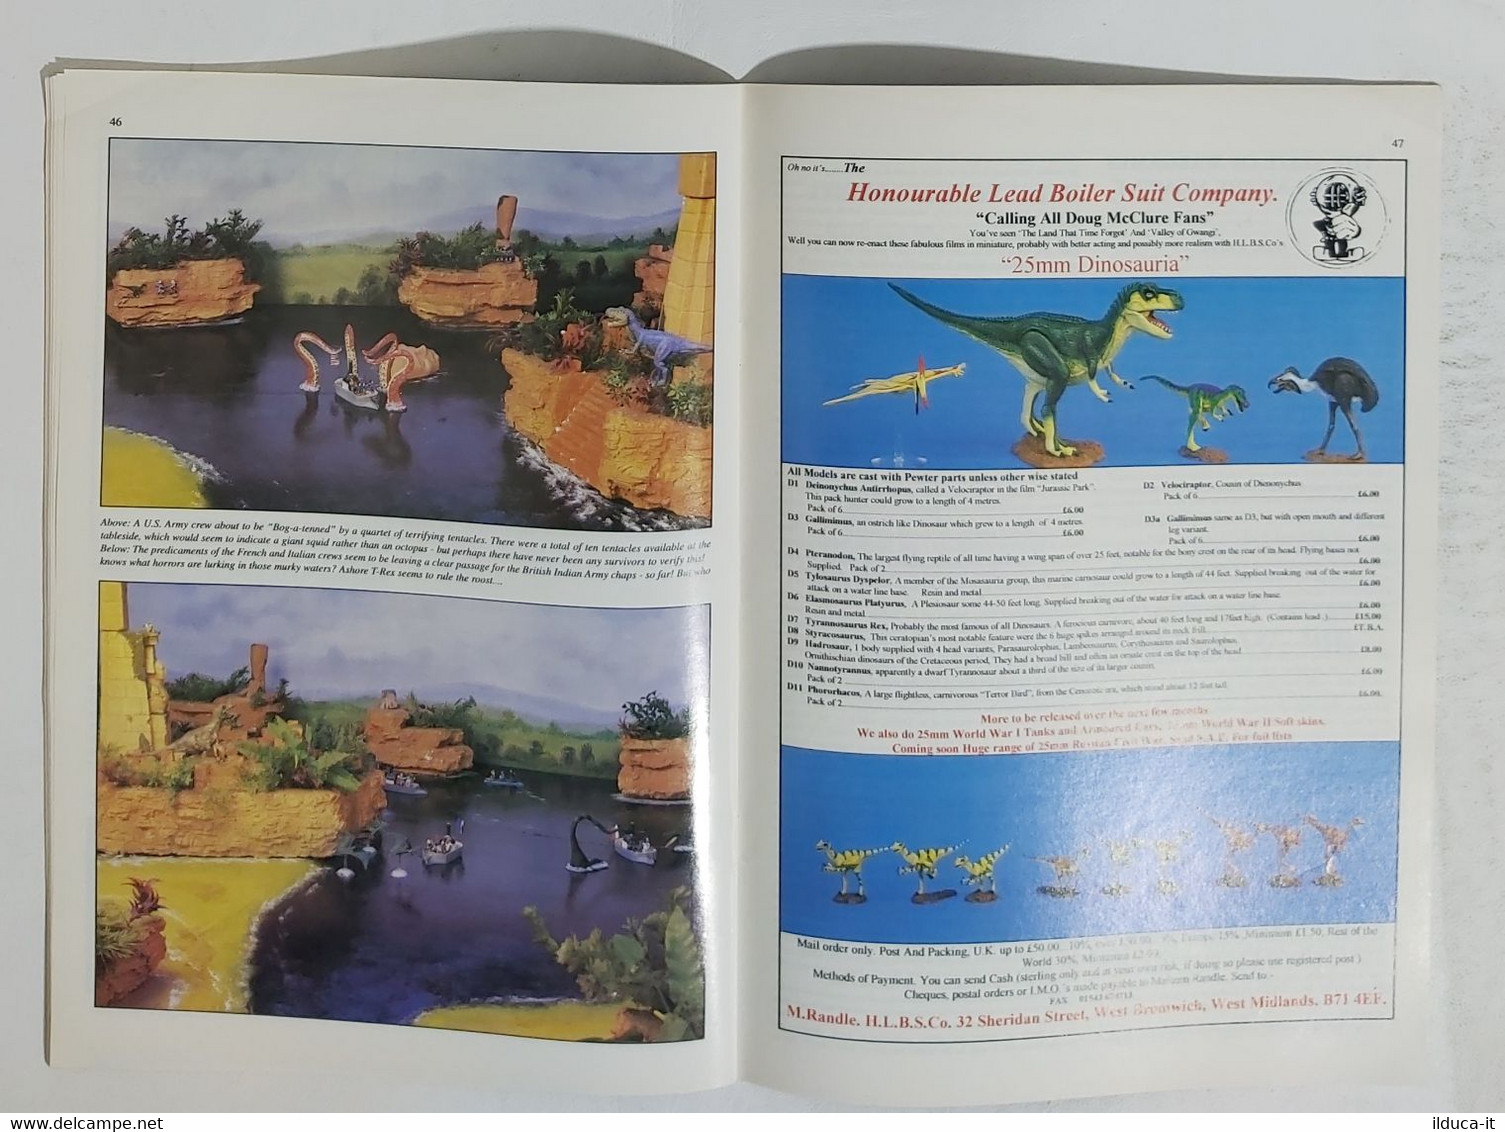 04972 Wargams Illustrated - 1998 - In Inglese - Crafts